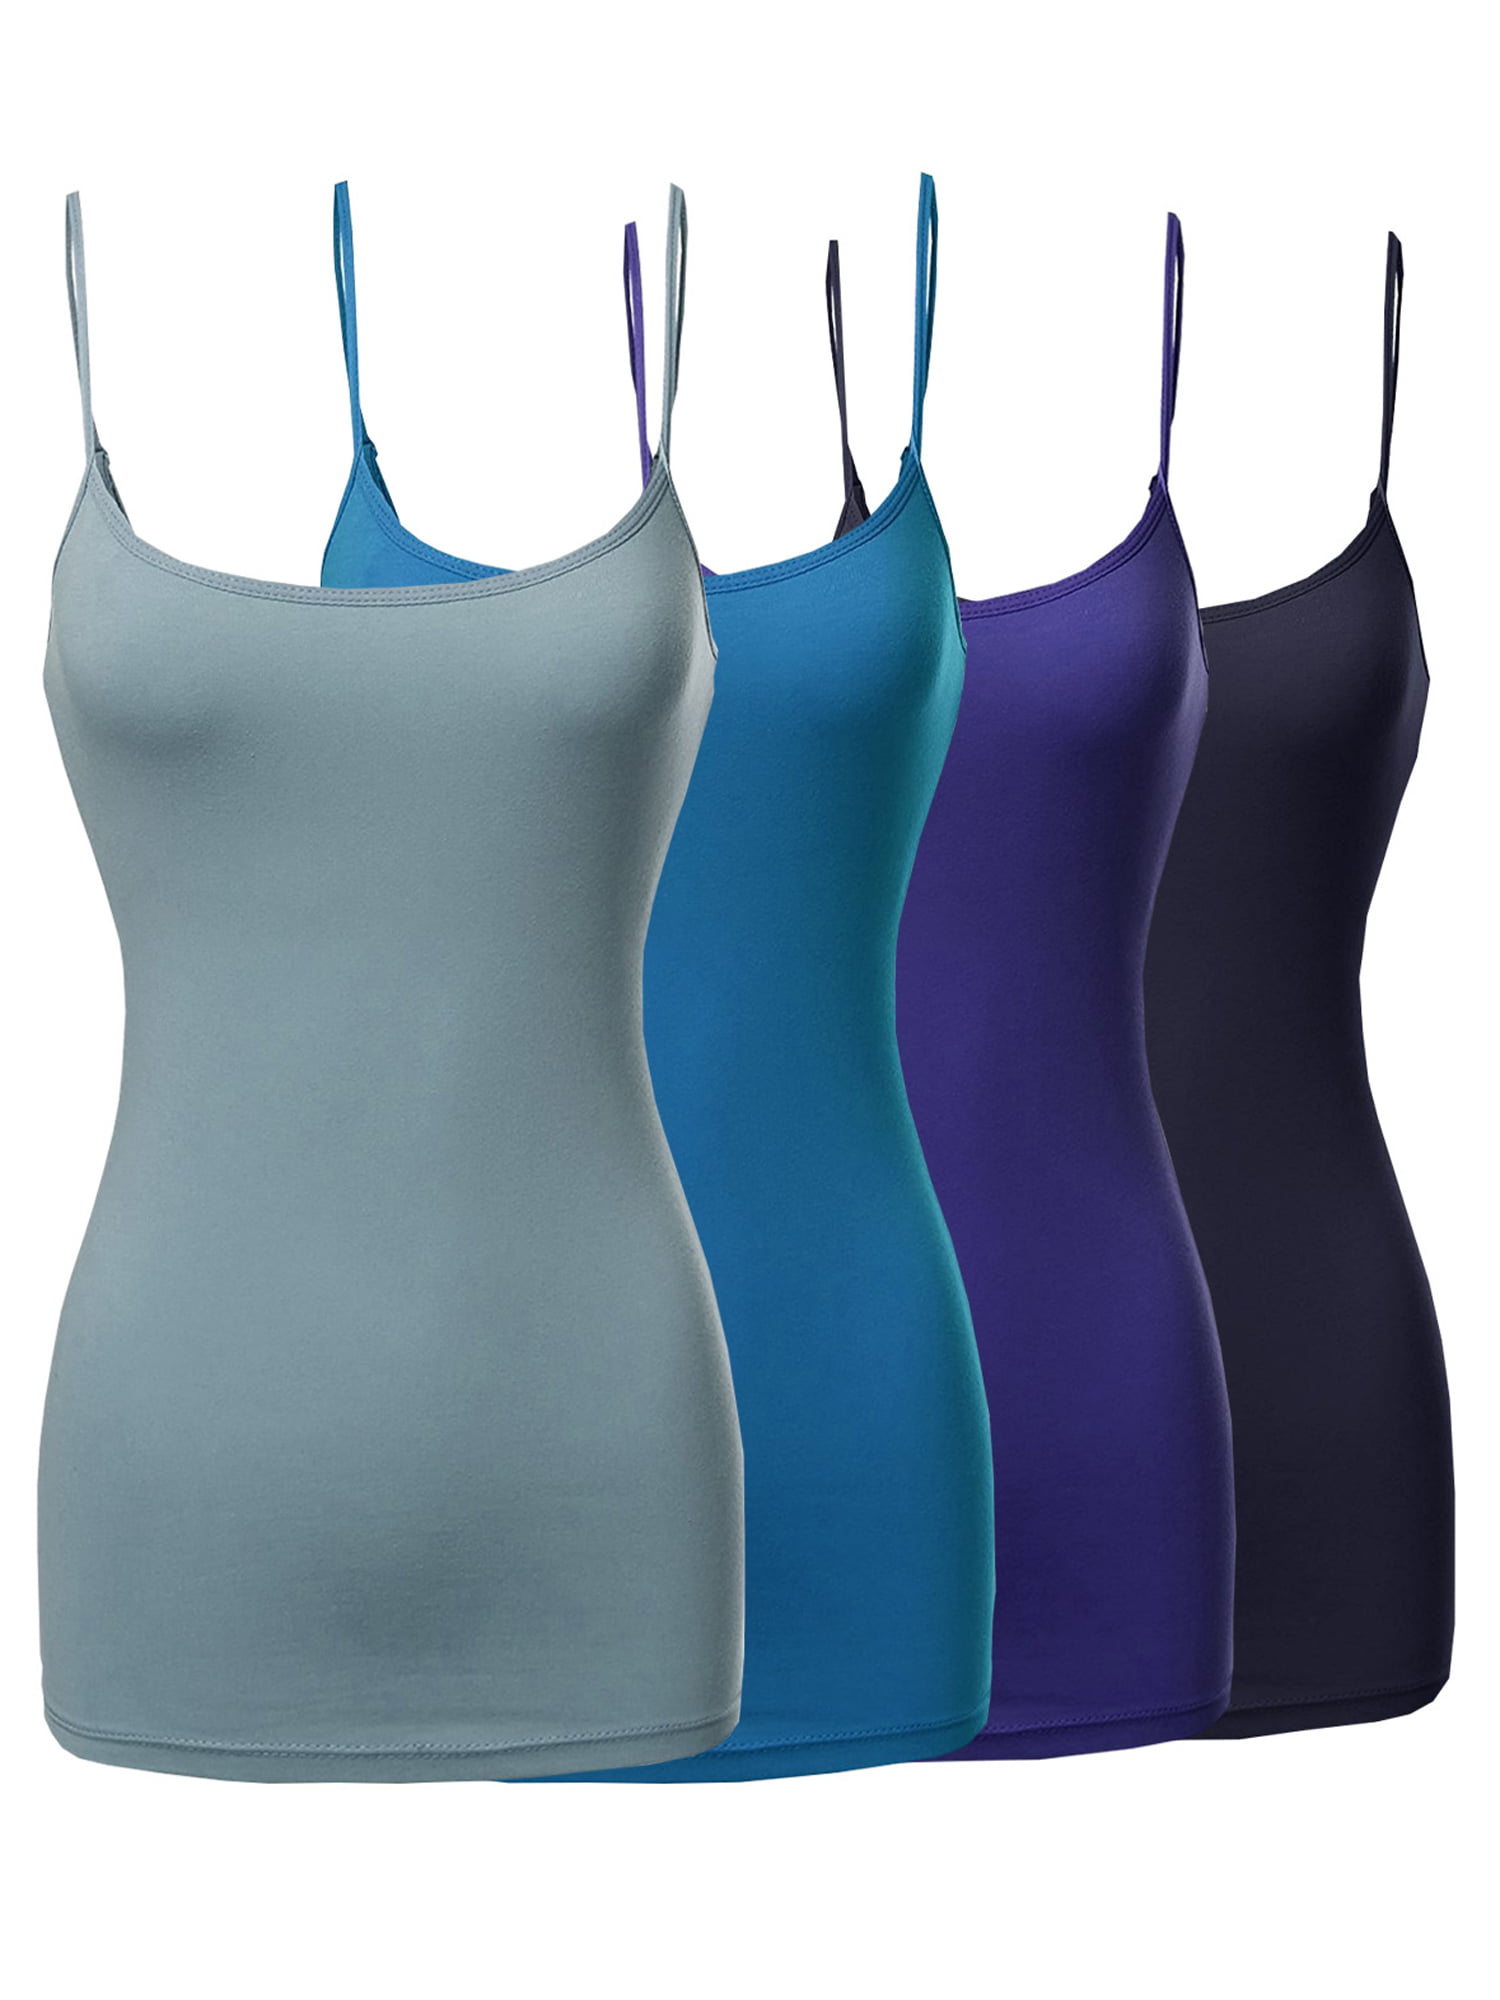 Womens & Juniors Basic Solid Long Length Adjustable Spaghetti Strap  Camisole Tank Top (4PK - H. Grey/H. Grey/Charcoal/Charcoal, M) 